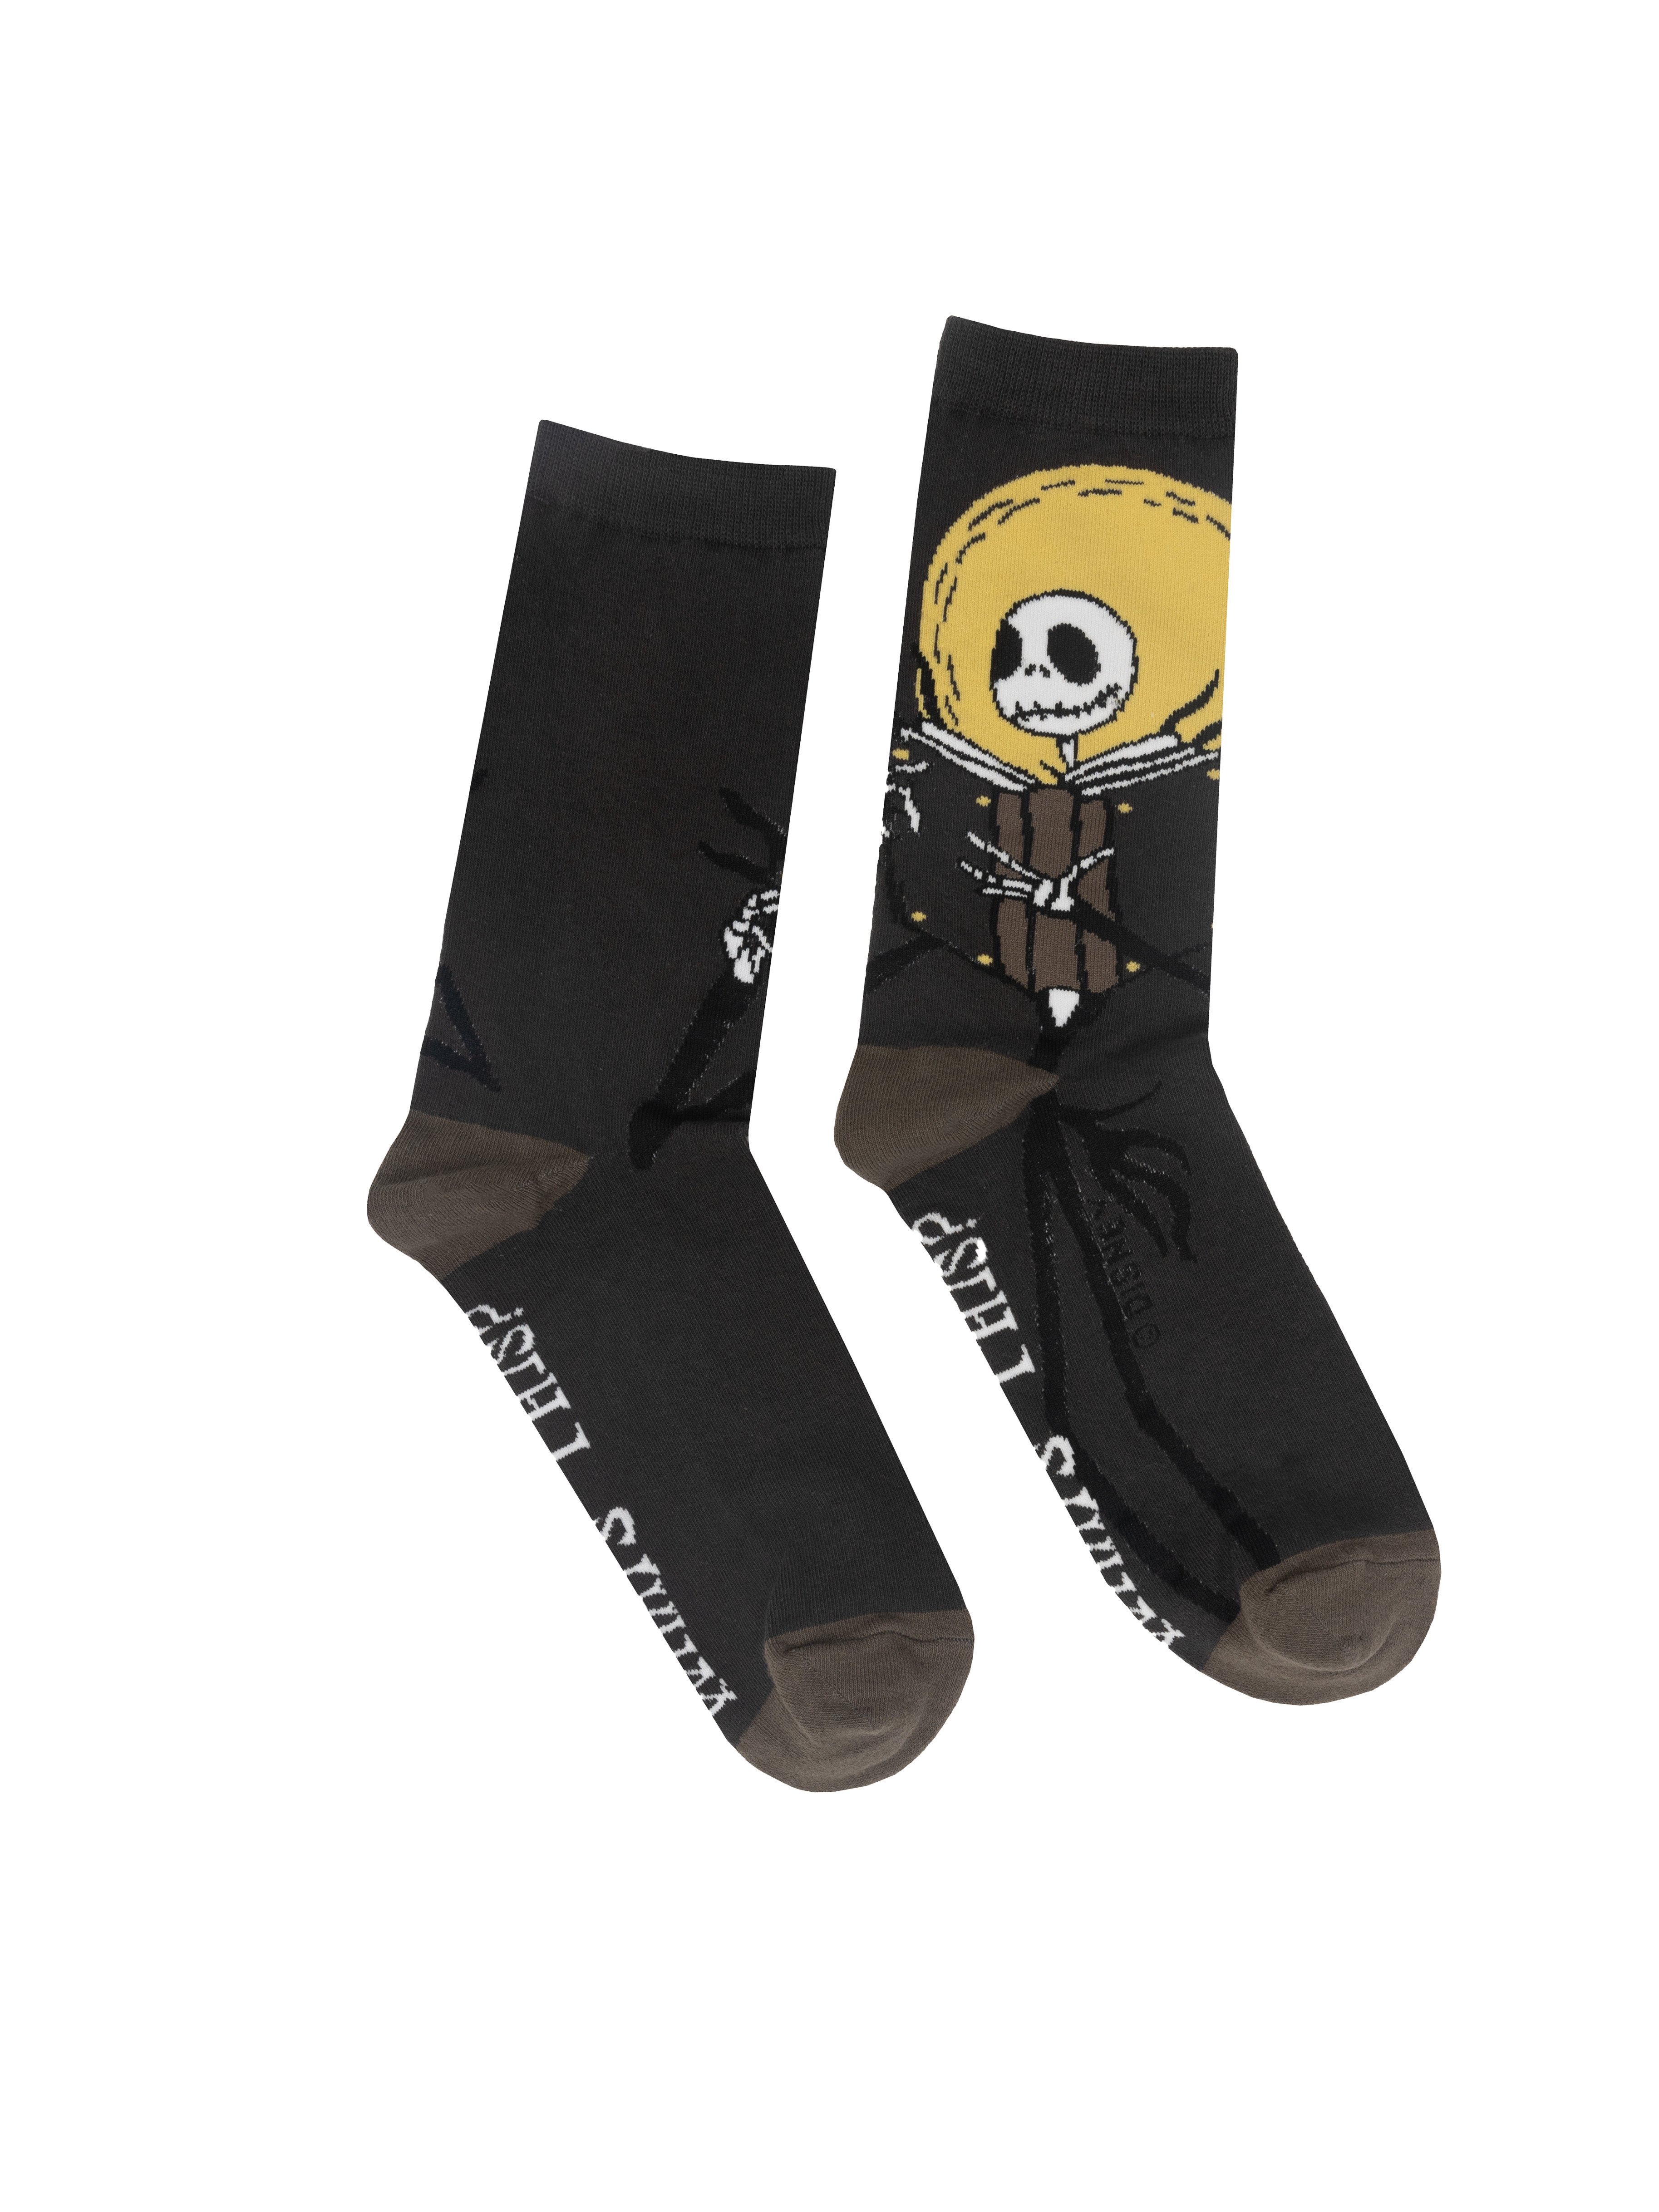 Disney Nightmare Before Christmas What's This Socks - Small